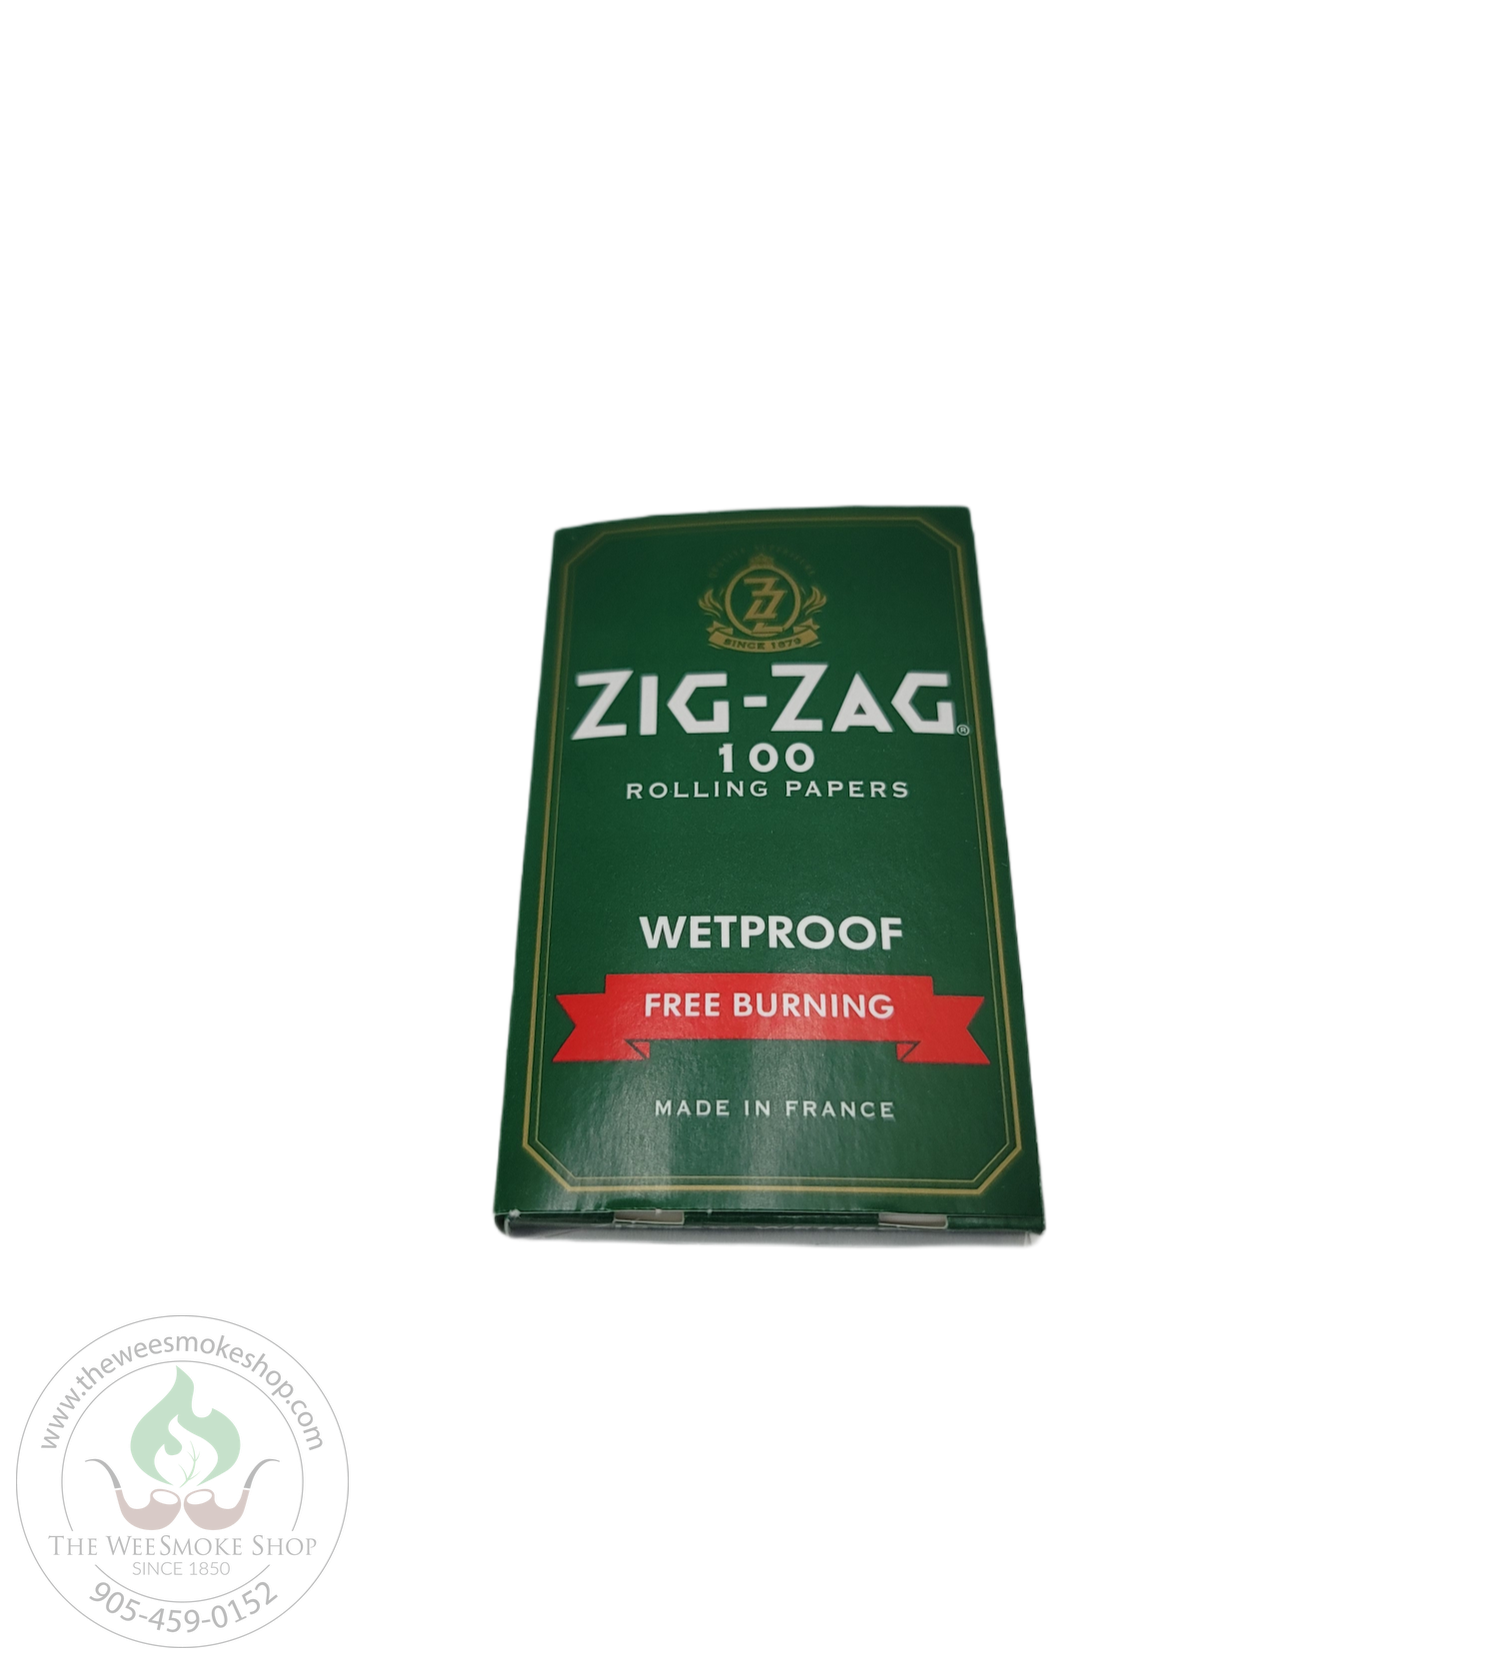 Zig Zag Green wet proof Rolling Papers-rolling papers that are free burning